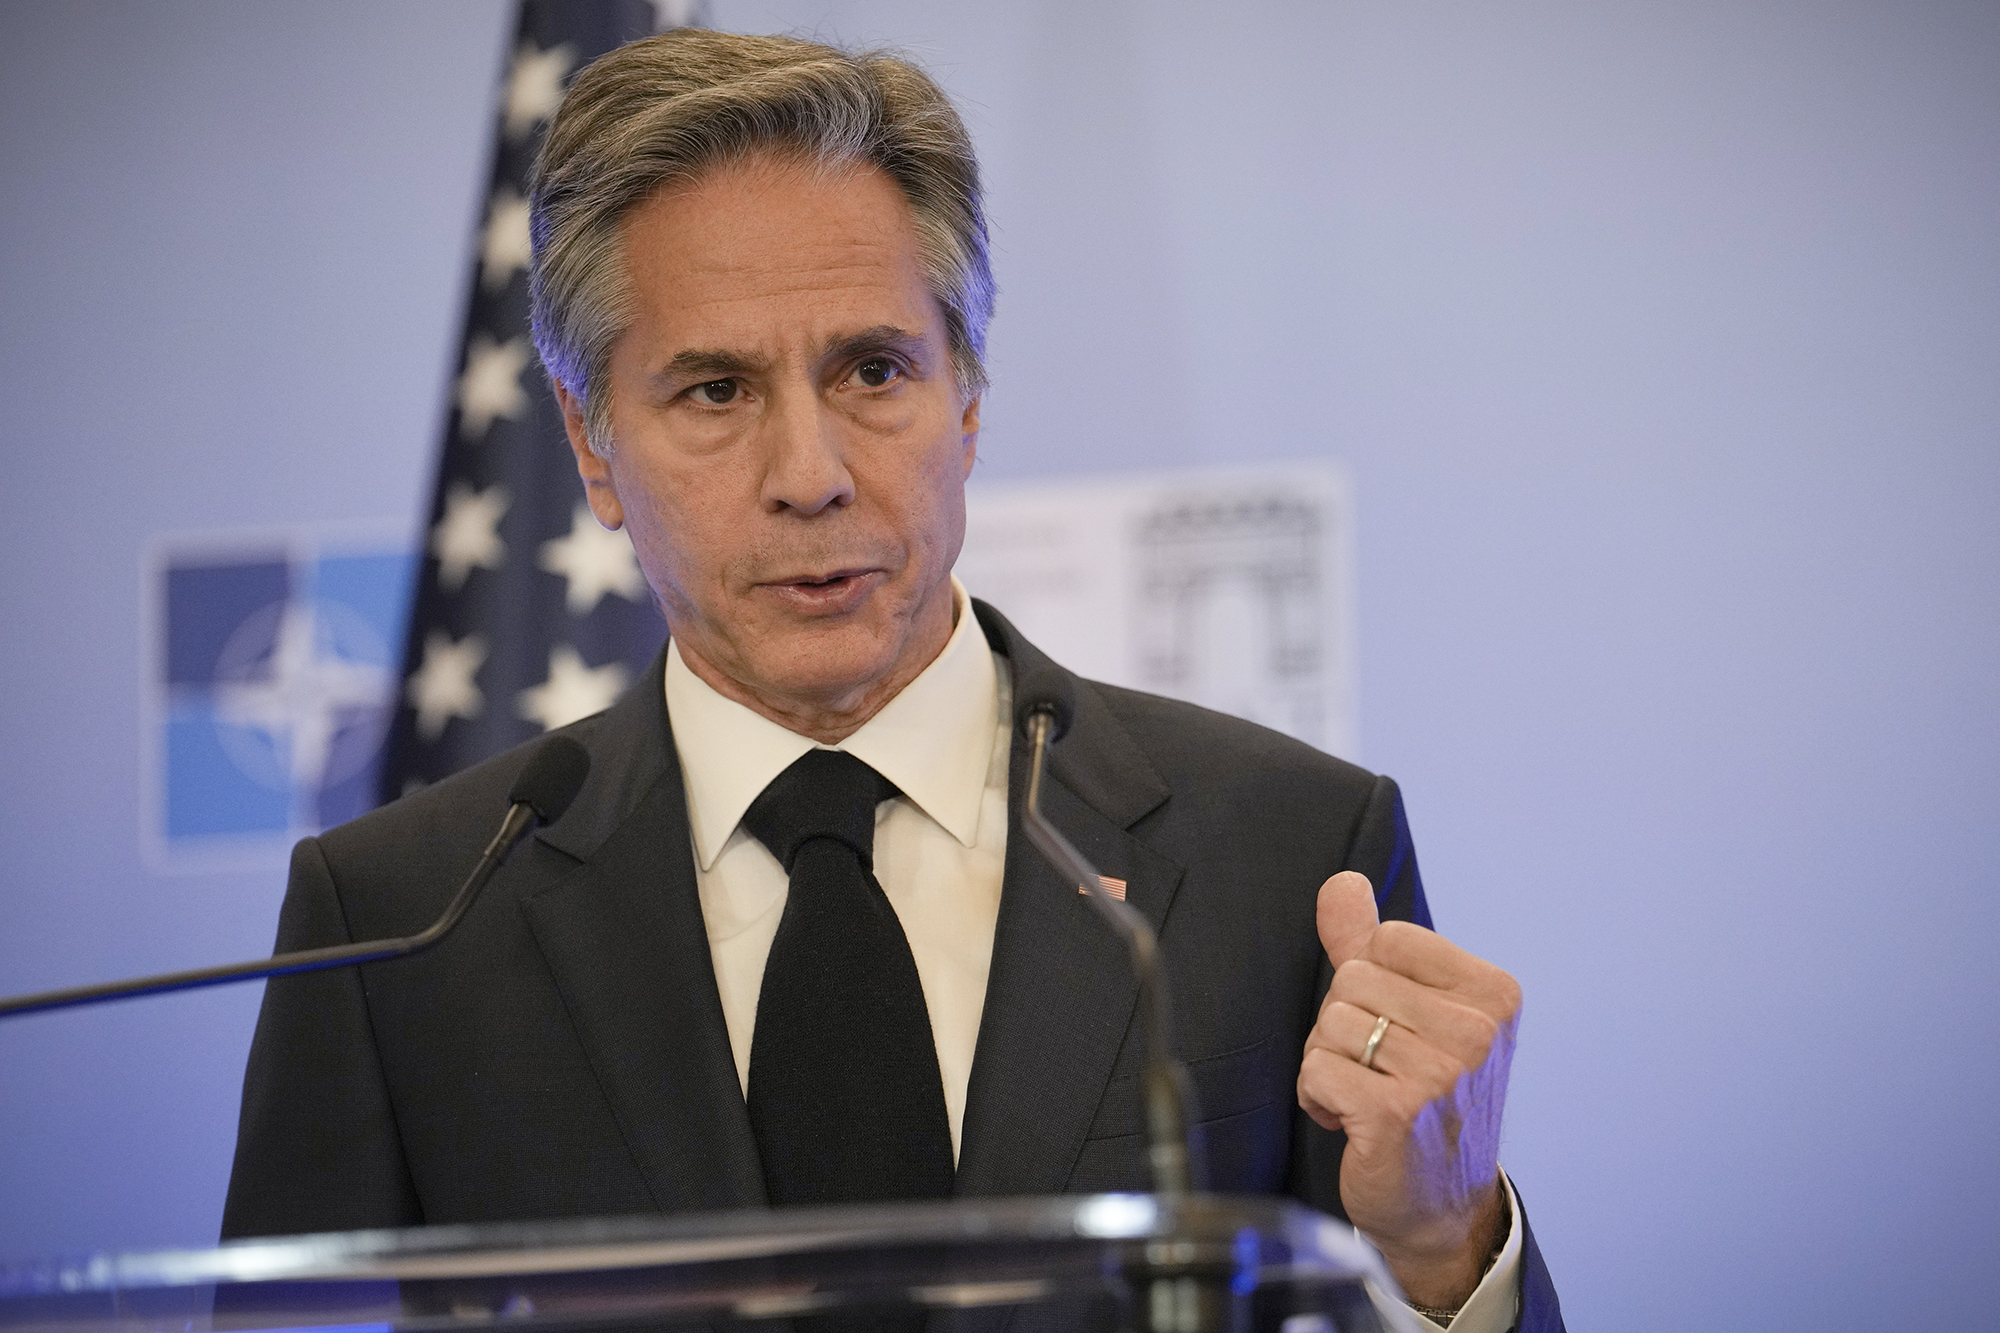 United States Secretary of State Antony Blinken gestures during a press conference in Bucharest, Romania, on November 30.